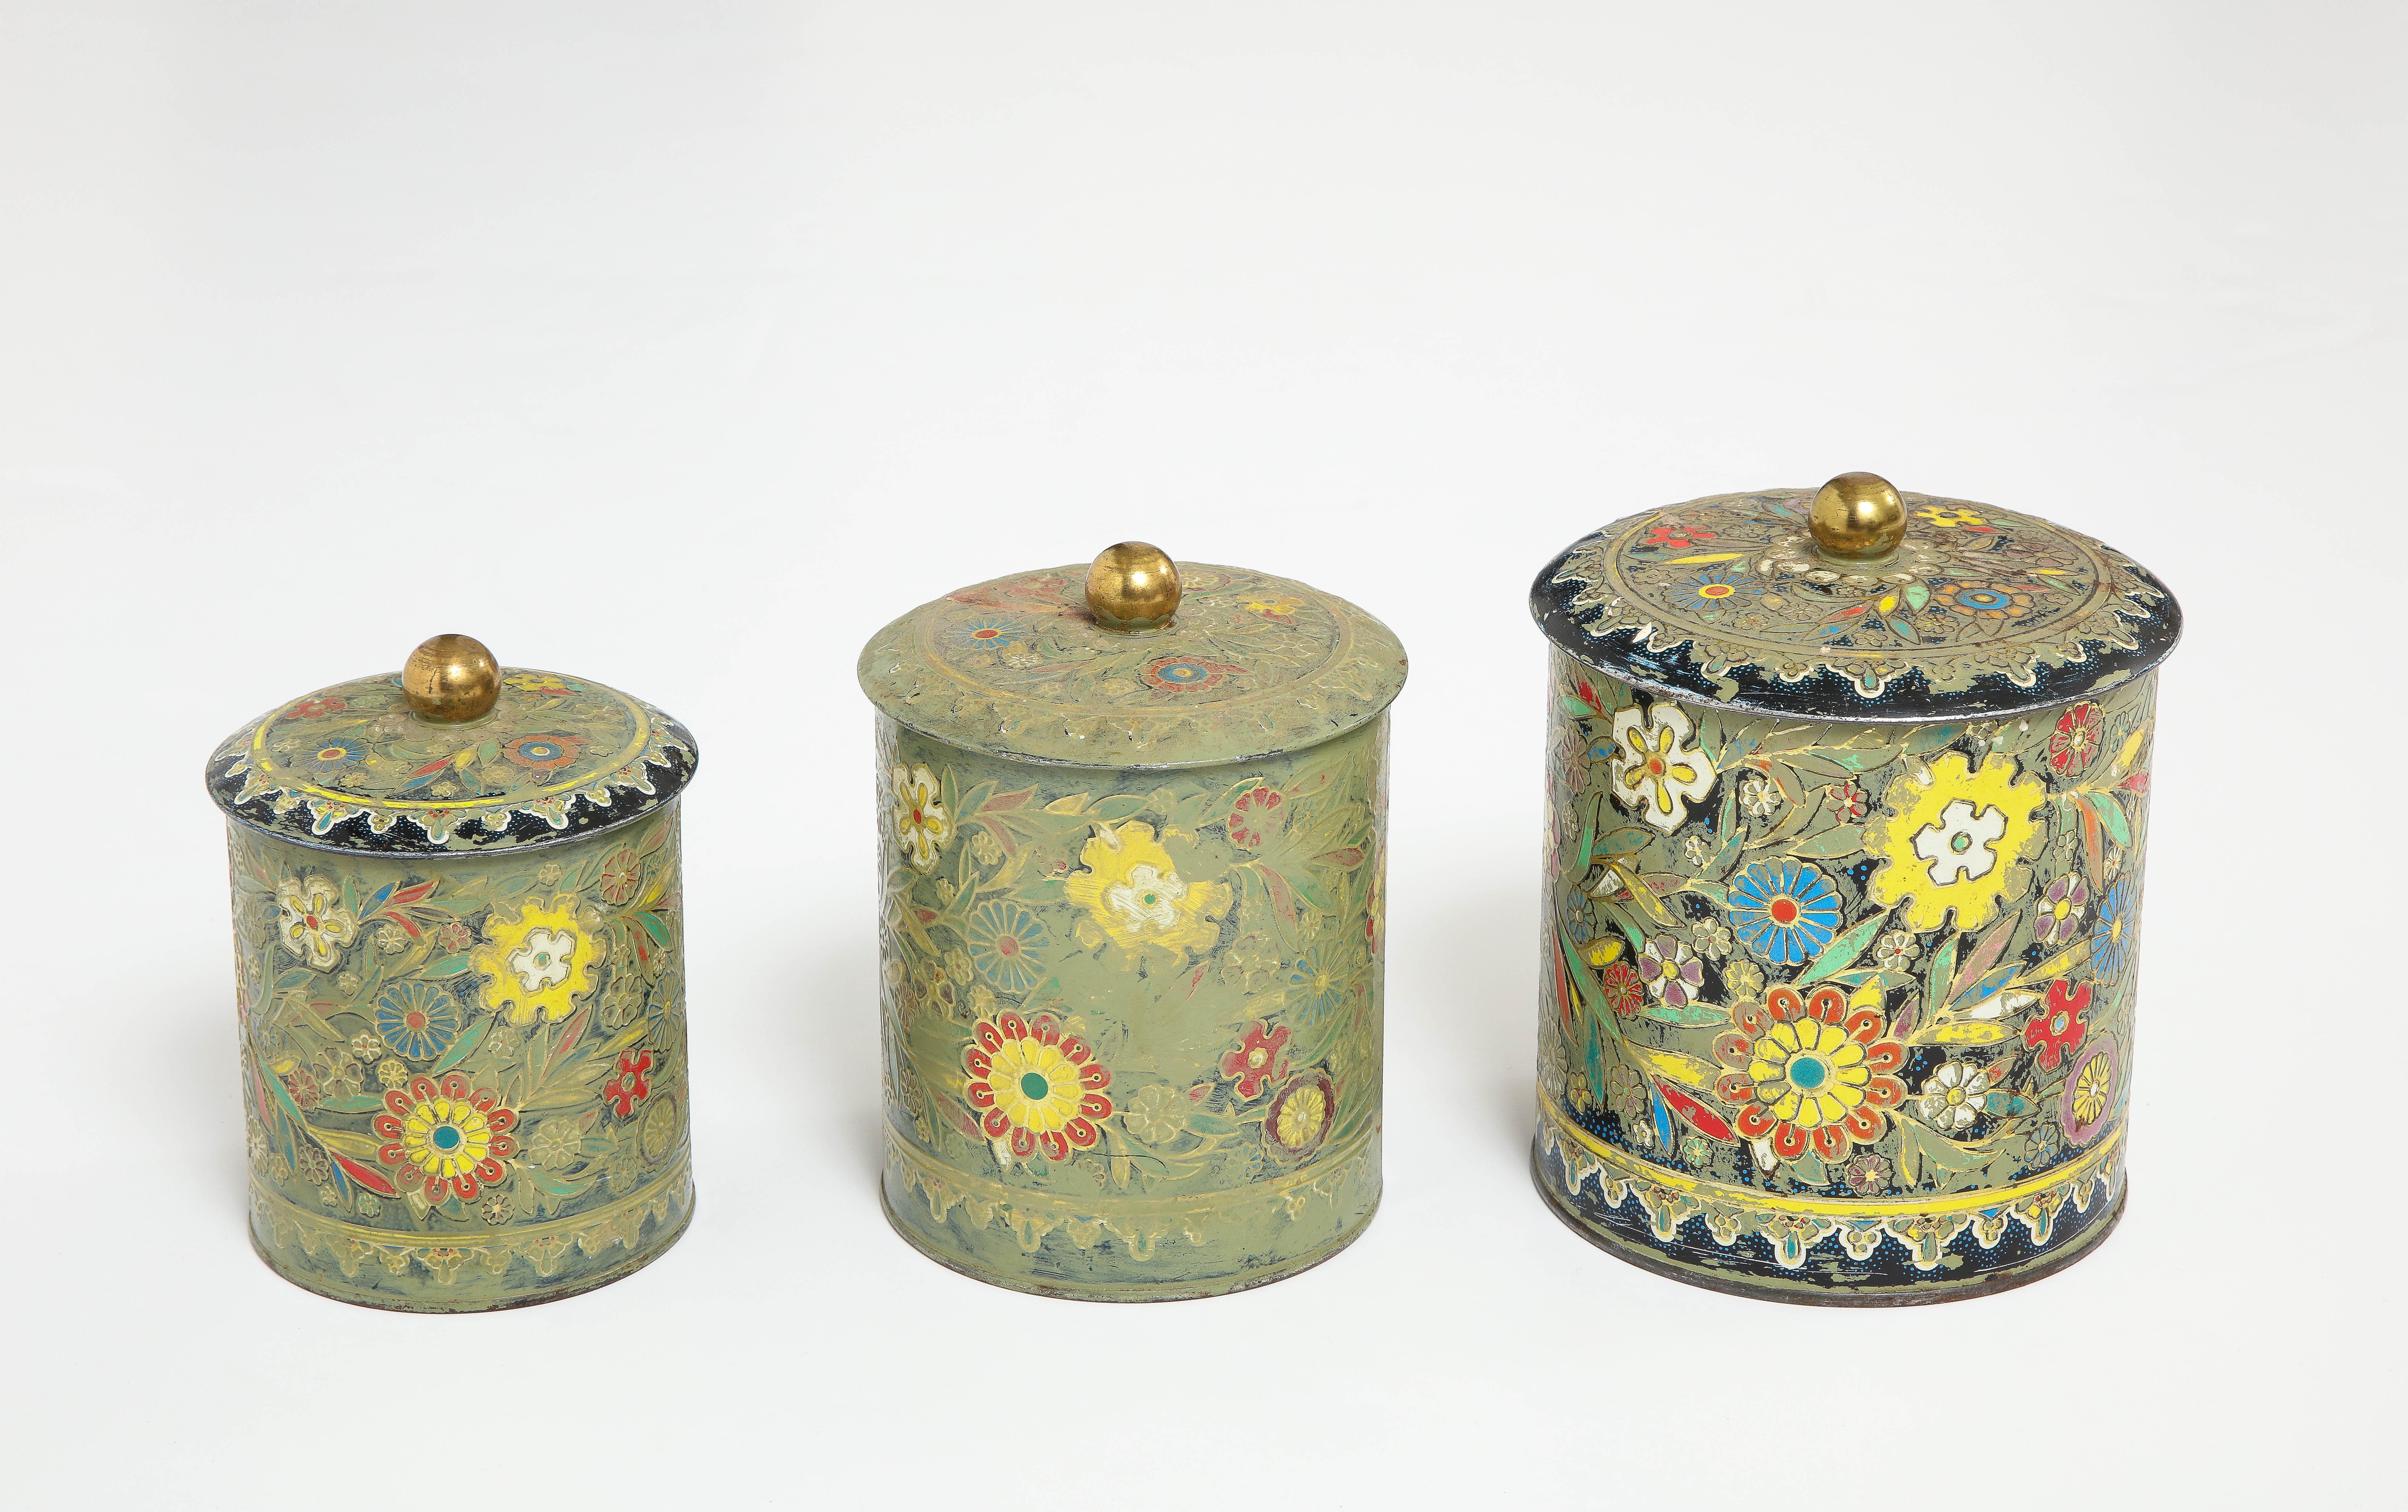 Set of 3 Art Deco cannisters with an enameled floral pattern.